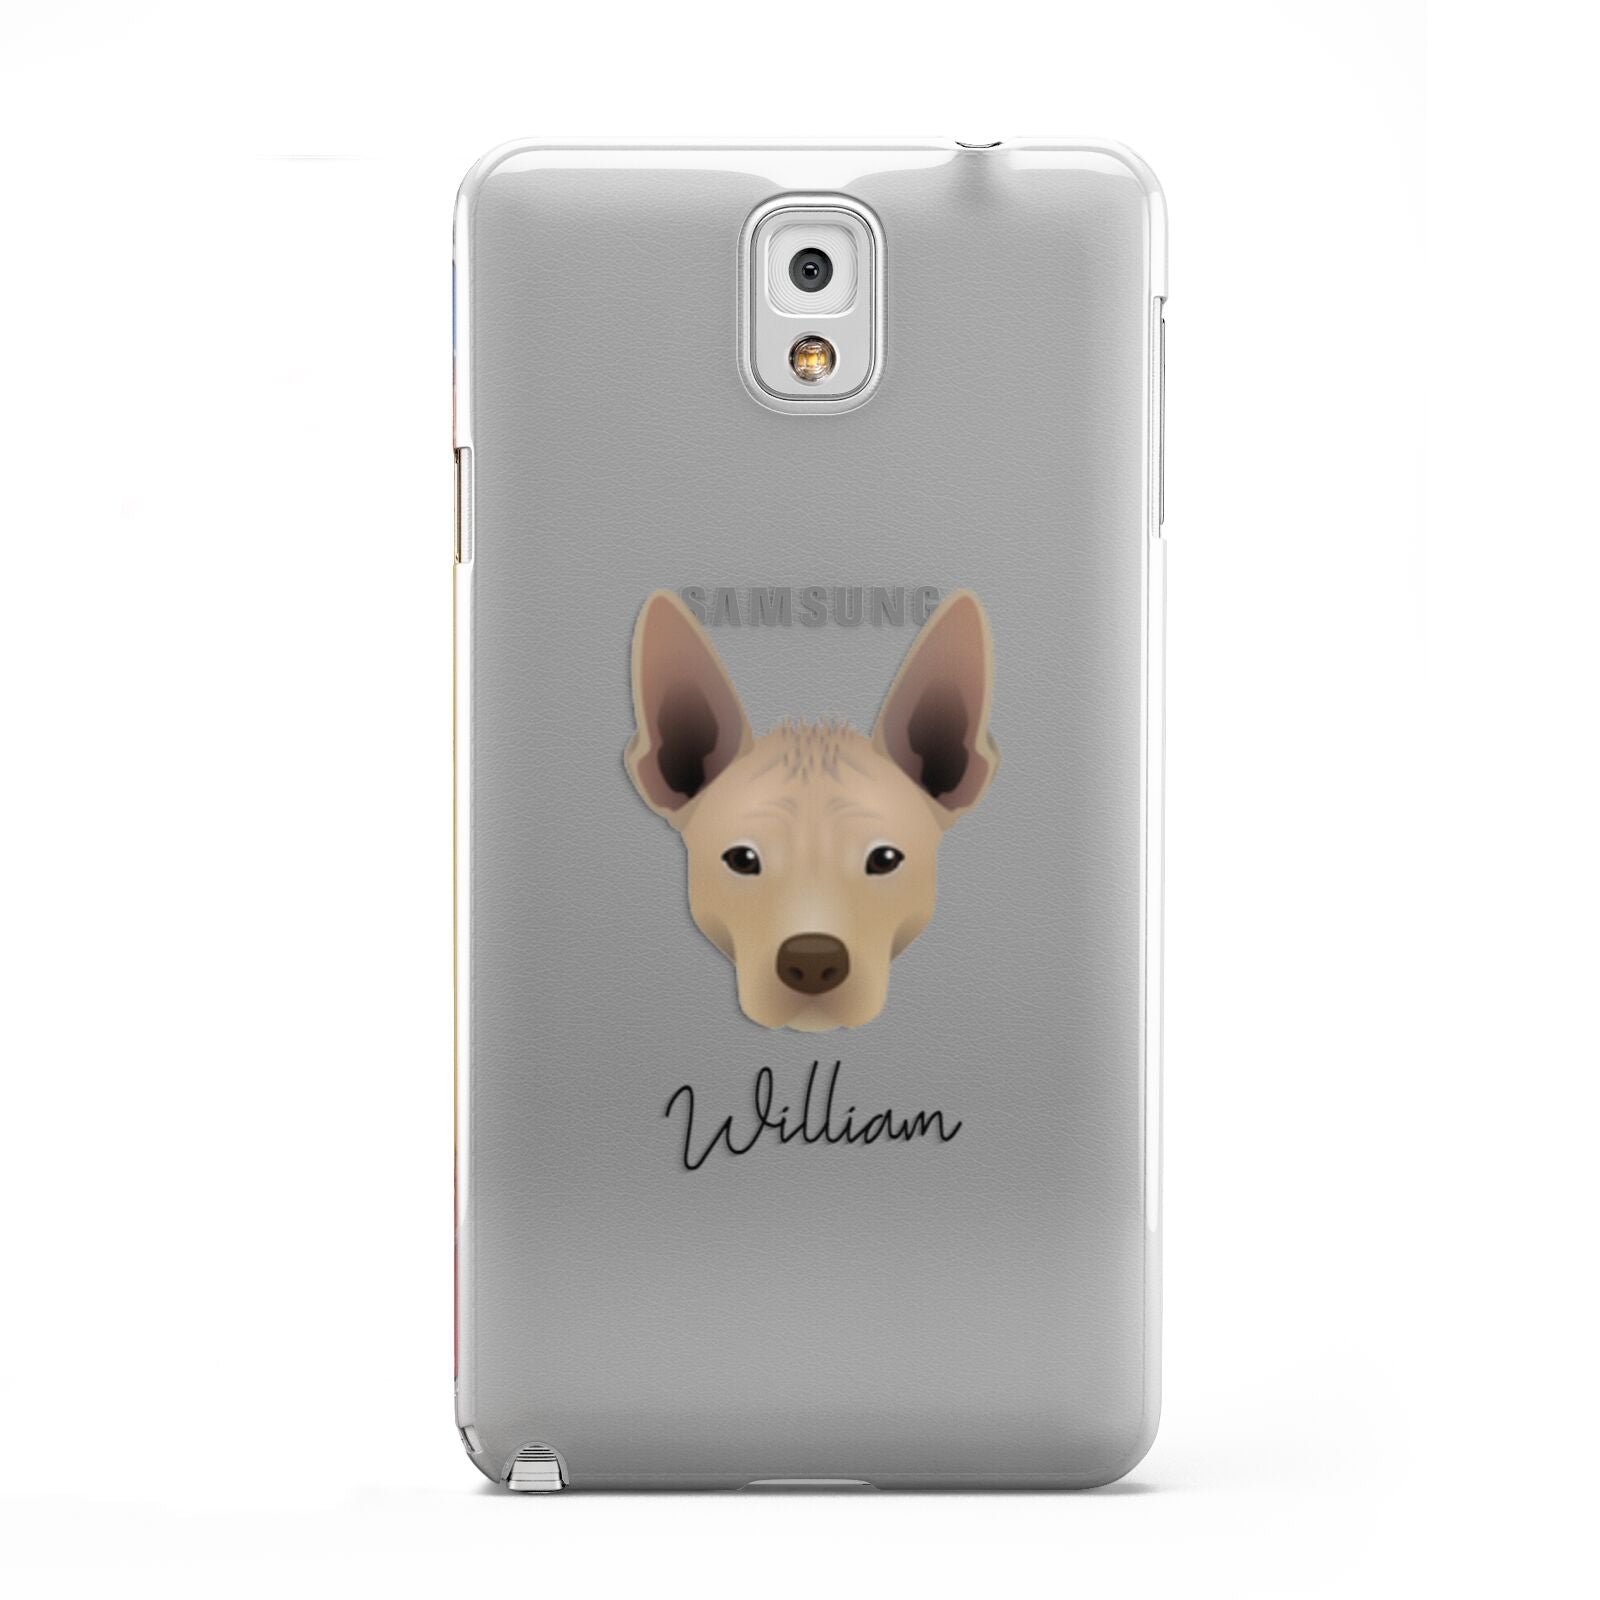 Mexican Hairless Personalised Samsung Galaxy Note 3 Case